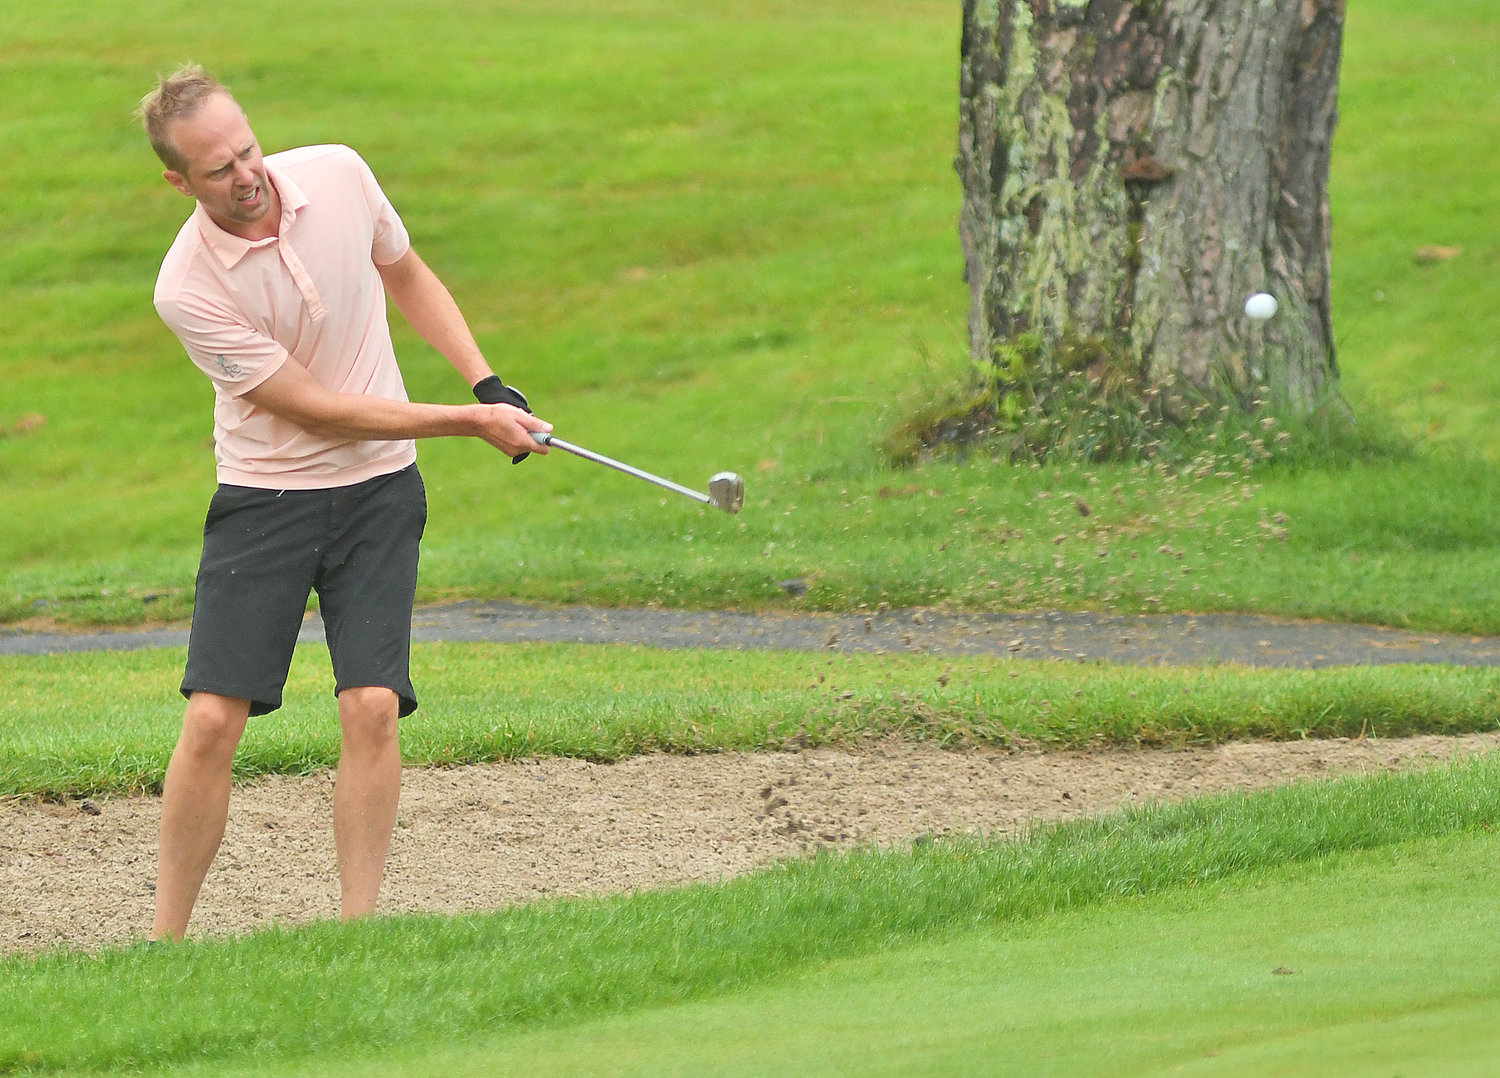 UP AND DOWN — Rome's Wes Cupp hits from the bunker on hole No. 5 during the second round of the Thirsty Owl New York Speedgolf Open at Rome Country Club. Cupp knocked in the sand shot to save par.